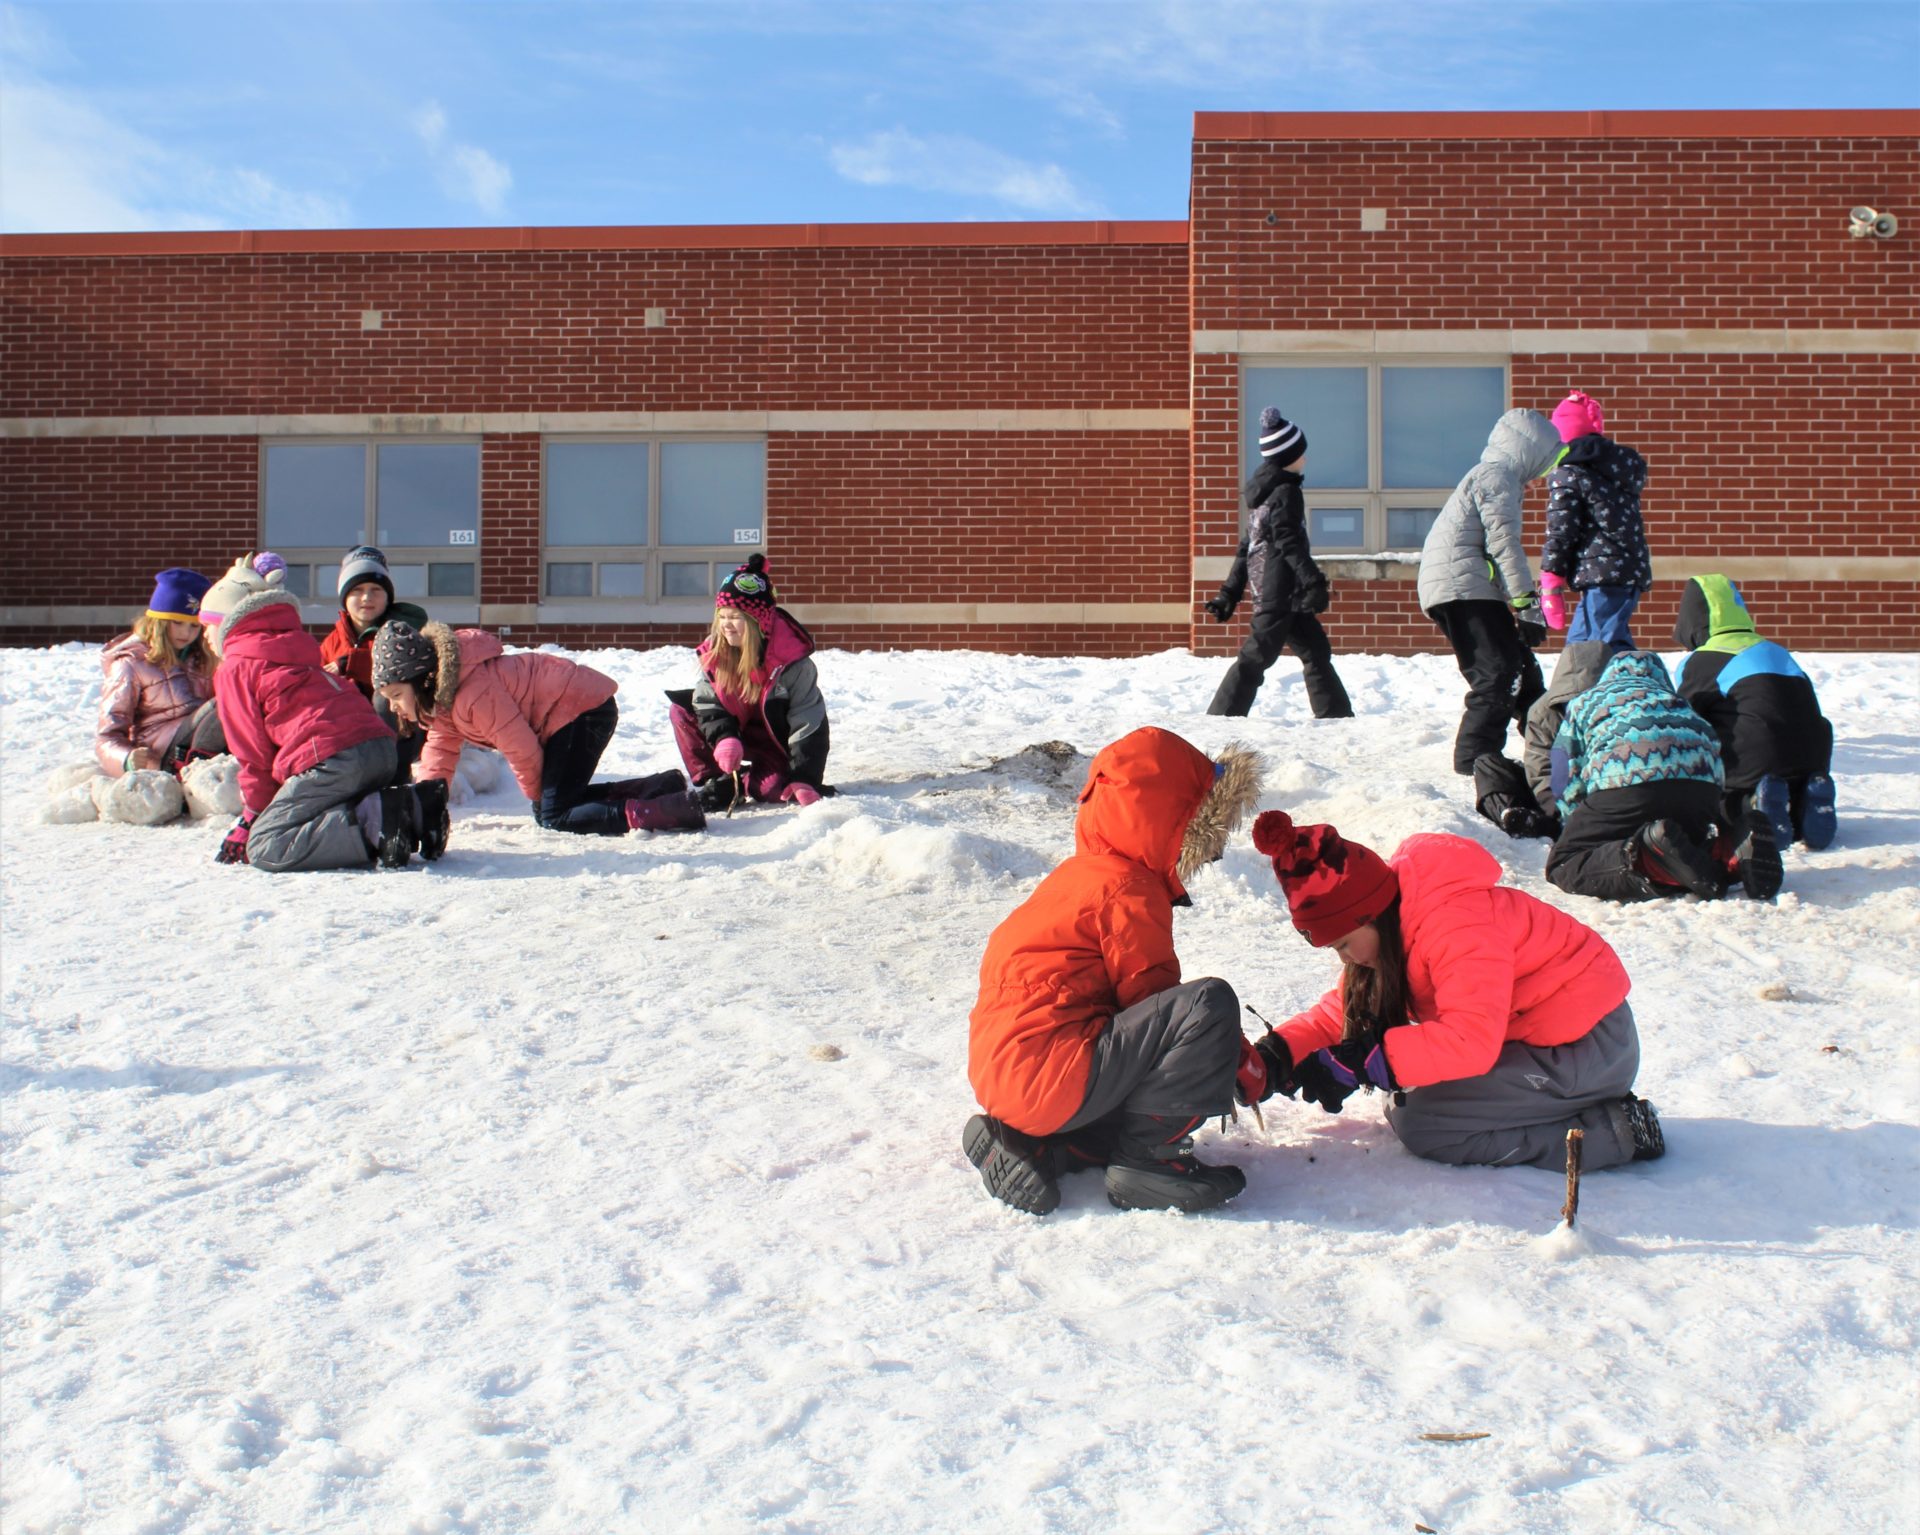 A group of students building snowballs.